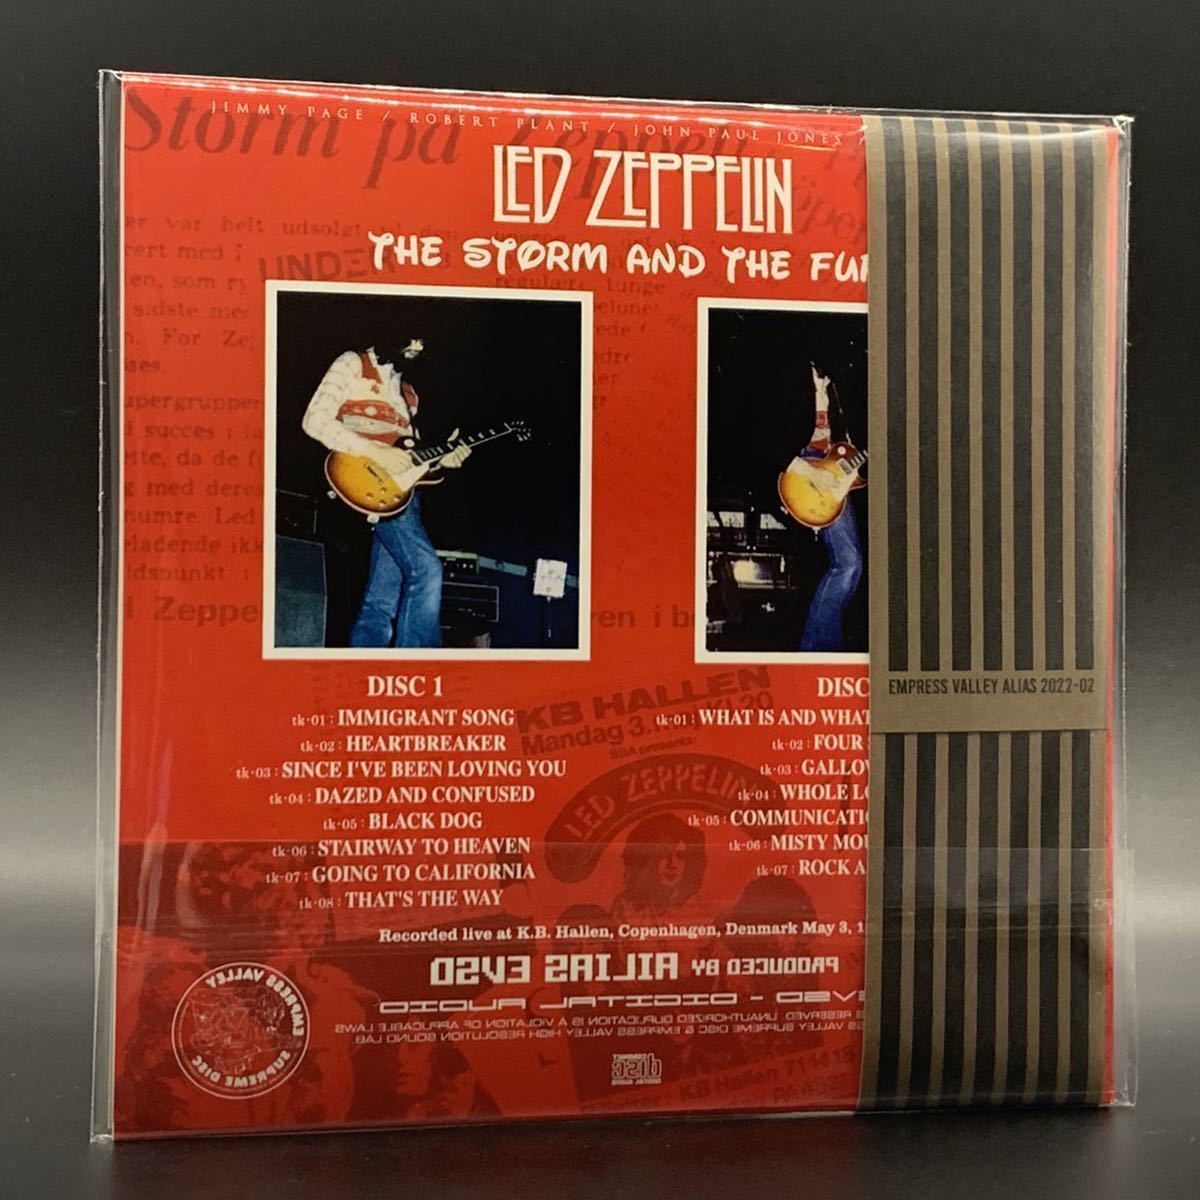 LED ZEPPELIN : THE STORM AND THE FURY 「嵐のレッド・ツェッペリン」 3CD 工場プレス銀盤CD ■欧米輸入限定盤　新品！_画像2